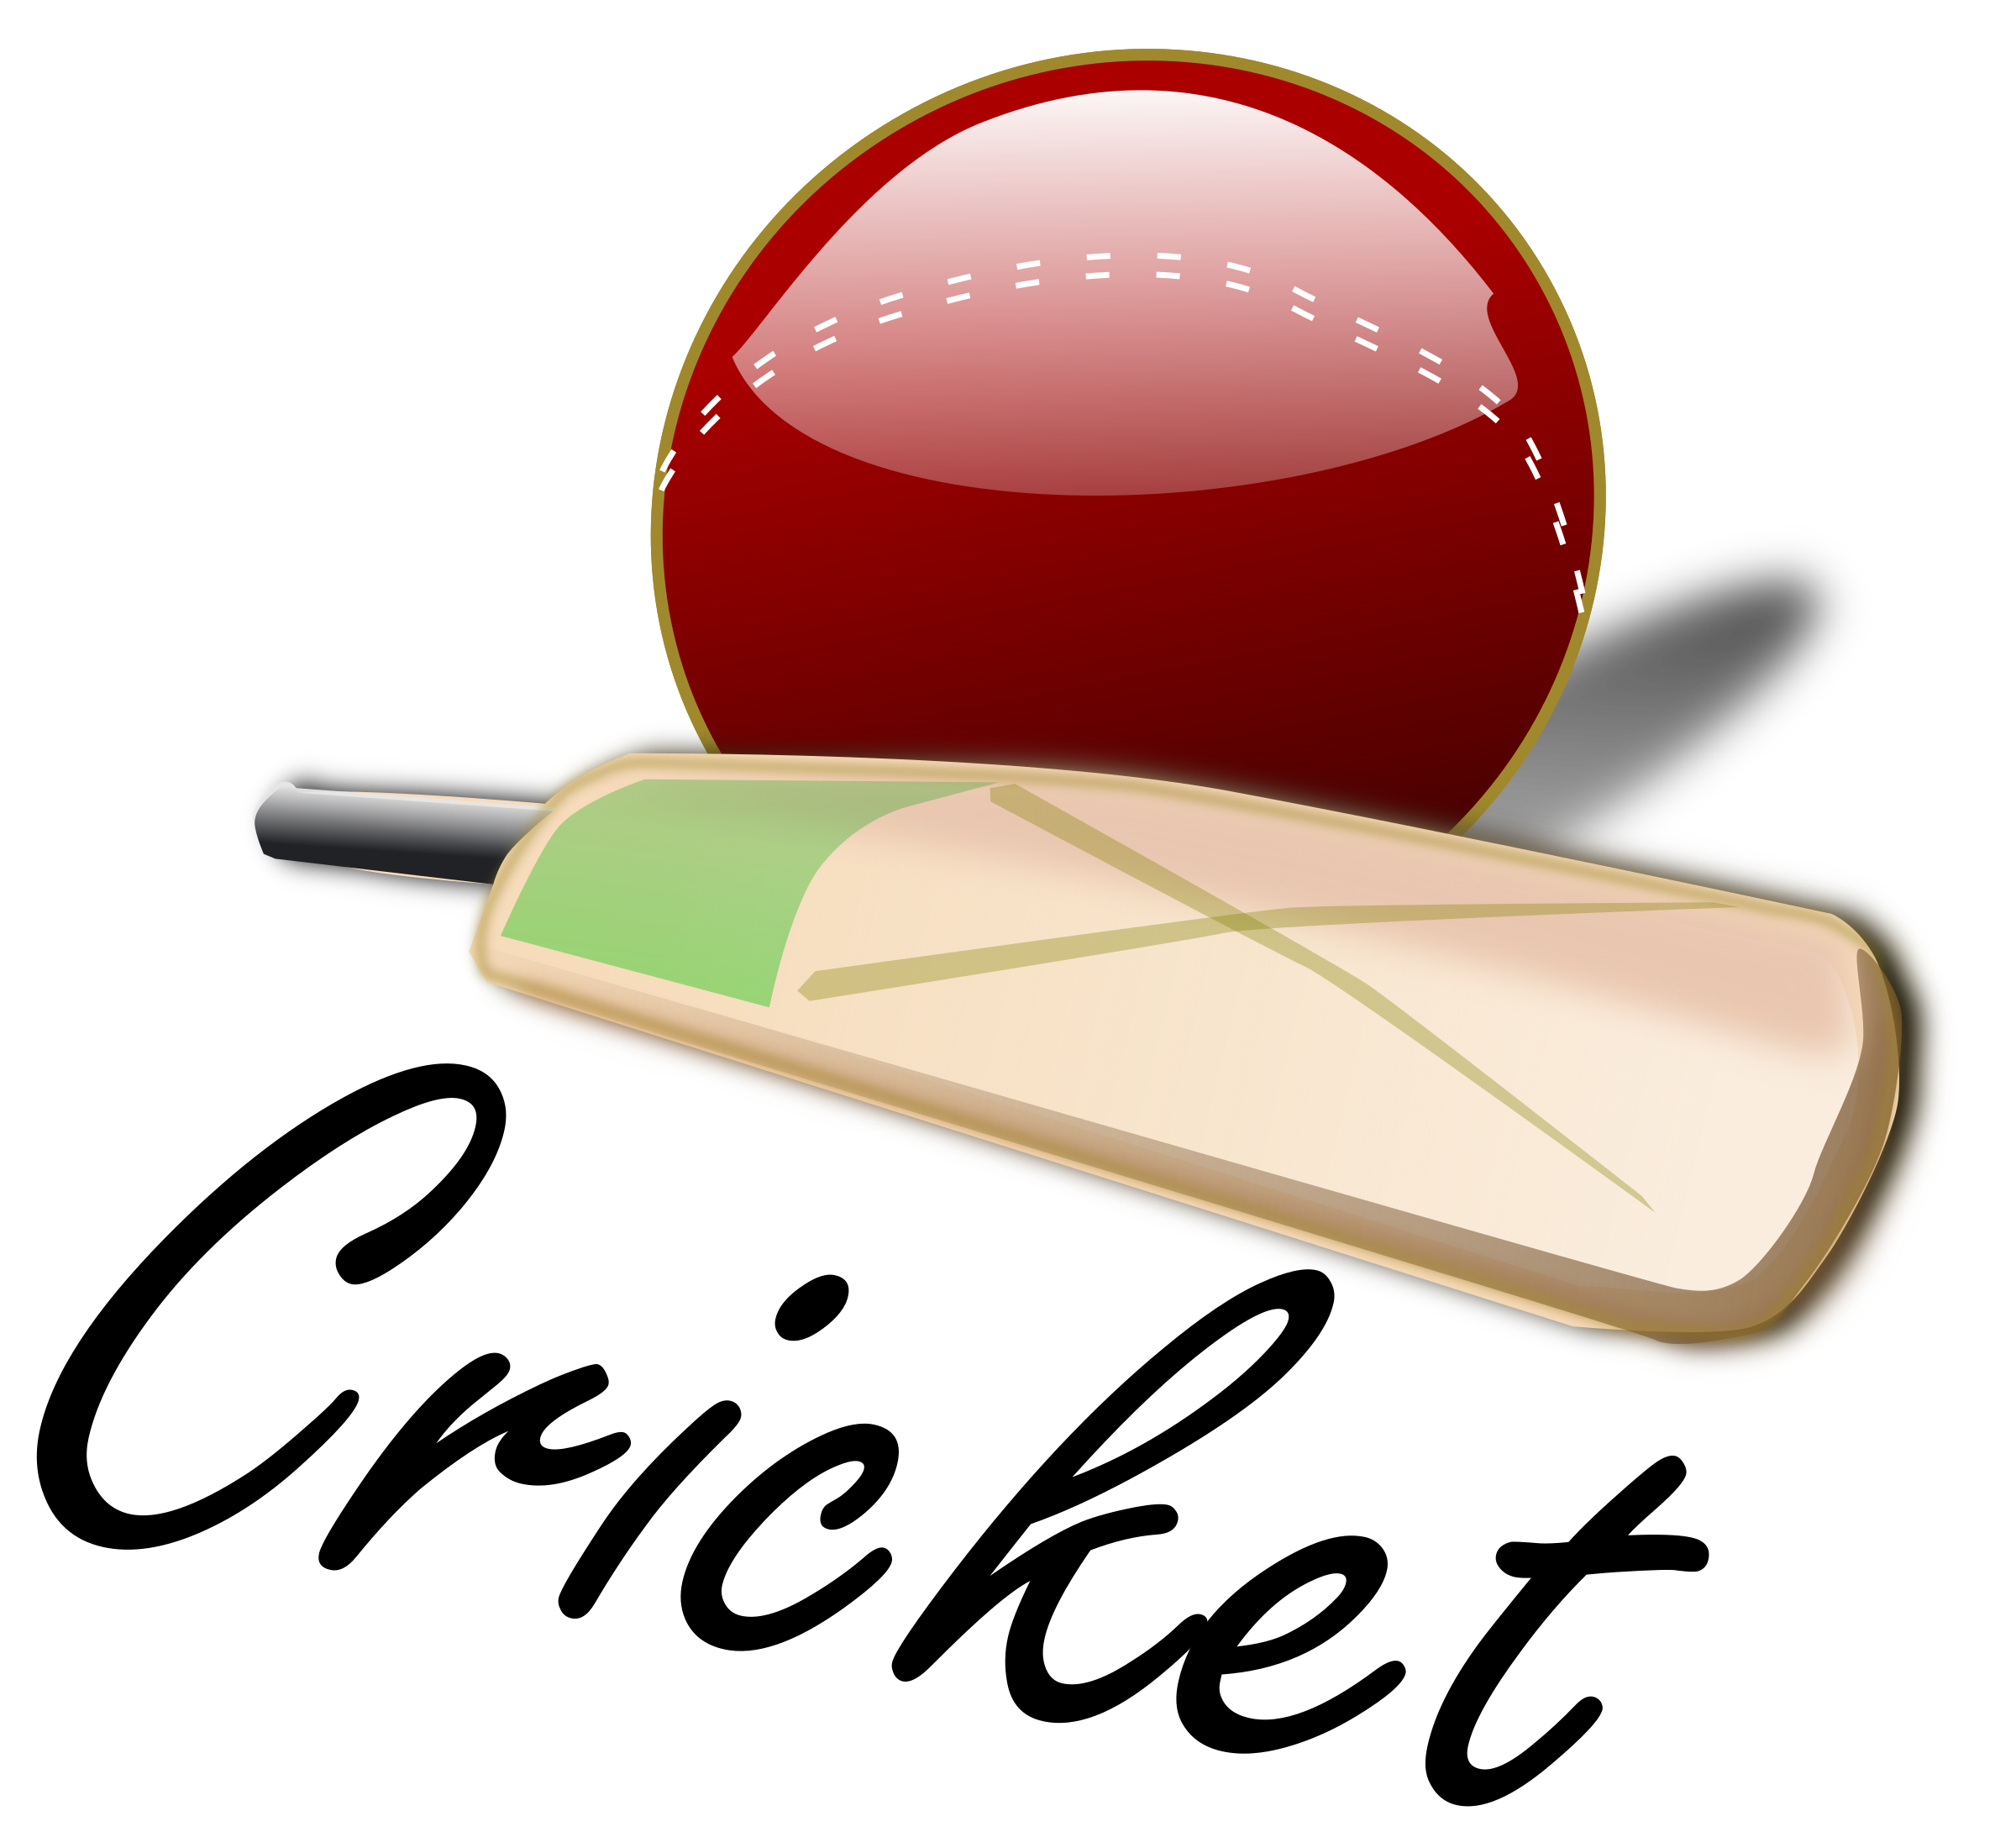  Cricket  match clipart  20 free Cliparts  Download images 